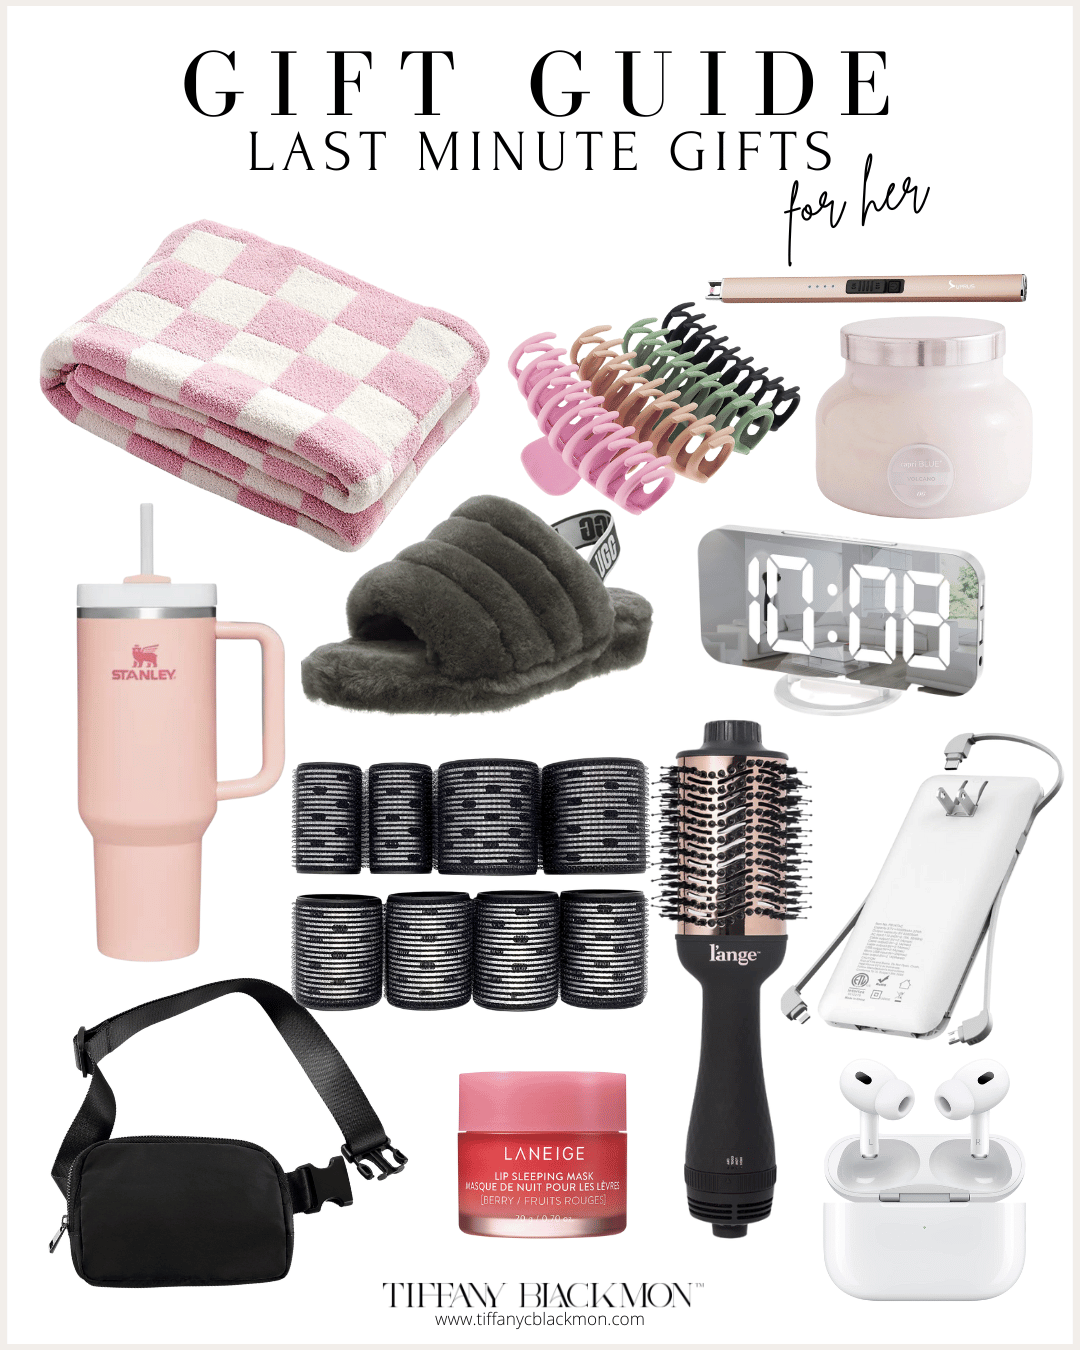 Last Minute Gifts For Her

#Holiday #Holidaygifting #Lastminute gifts #Giftsforhim # Giftsforher #Hostessgifts #Curbsidegifts #Christmas2022